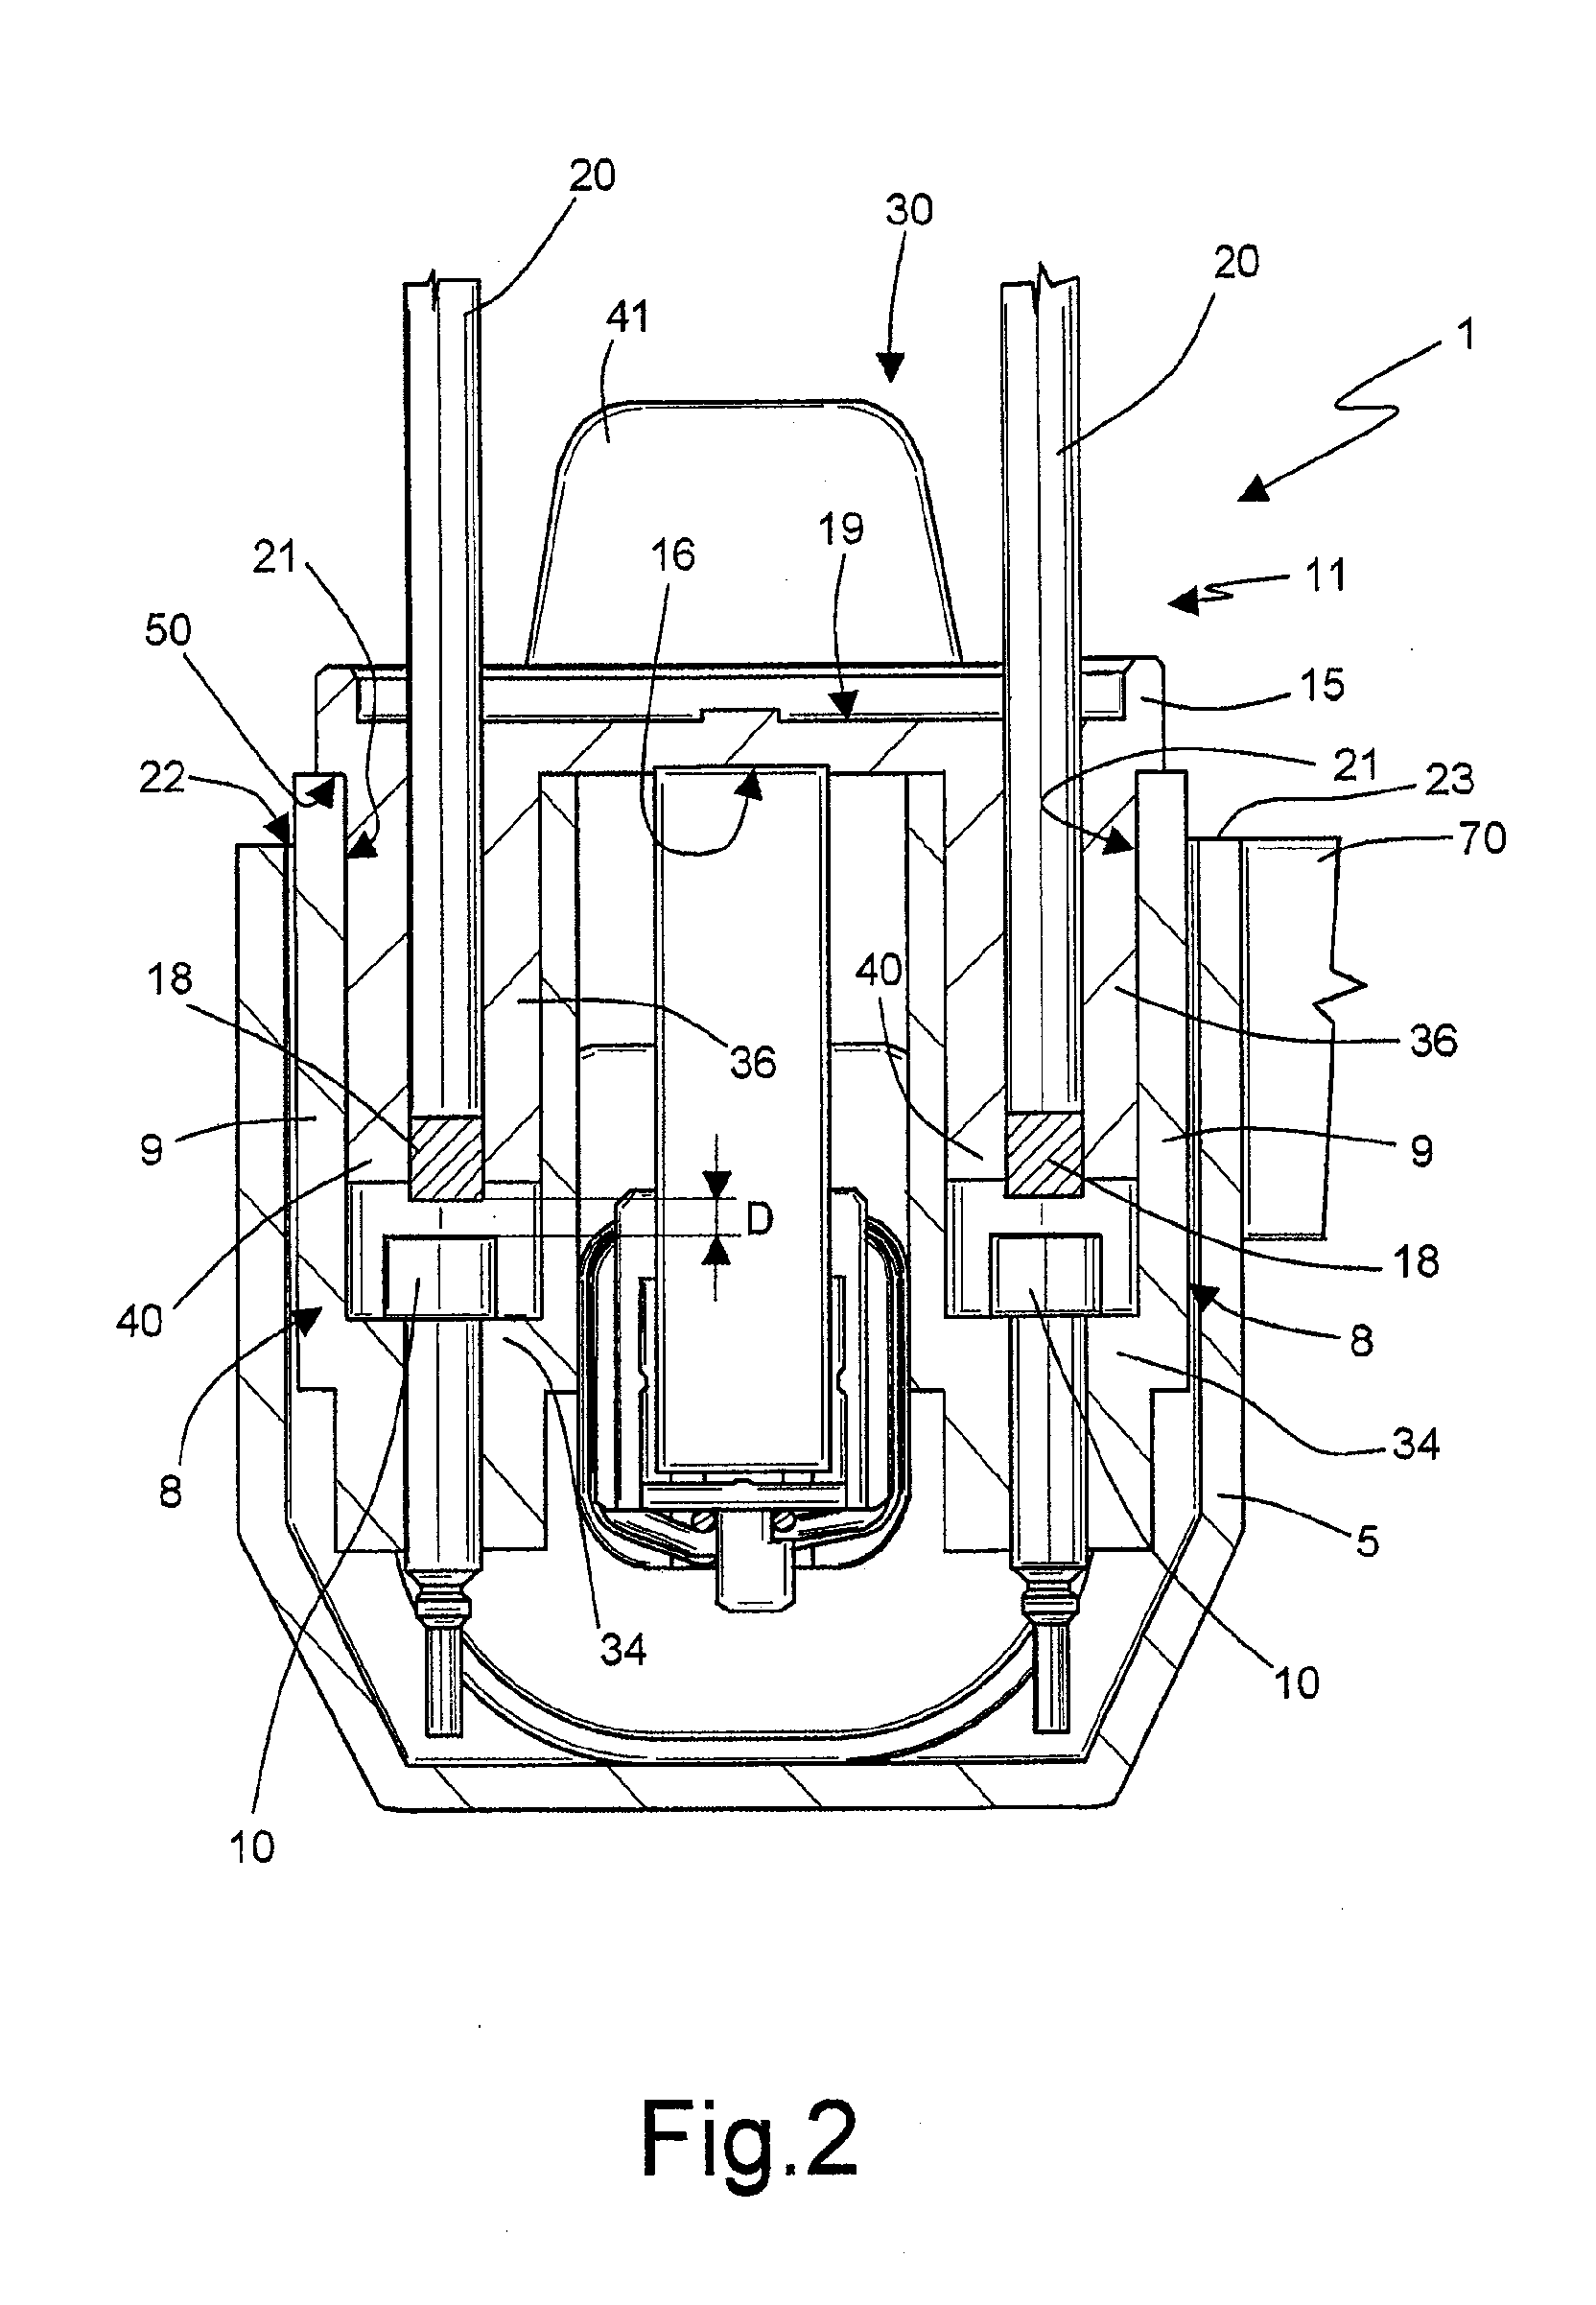 Gas lighting device for an electric household appliance, in particular a cooking range, having a quick connection system to the electrodes